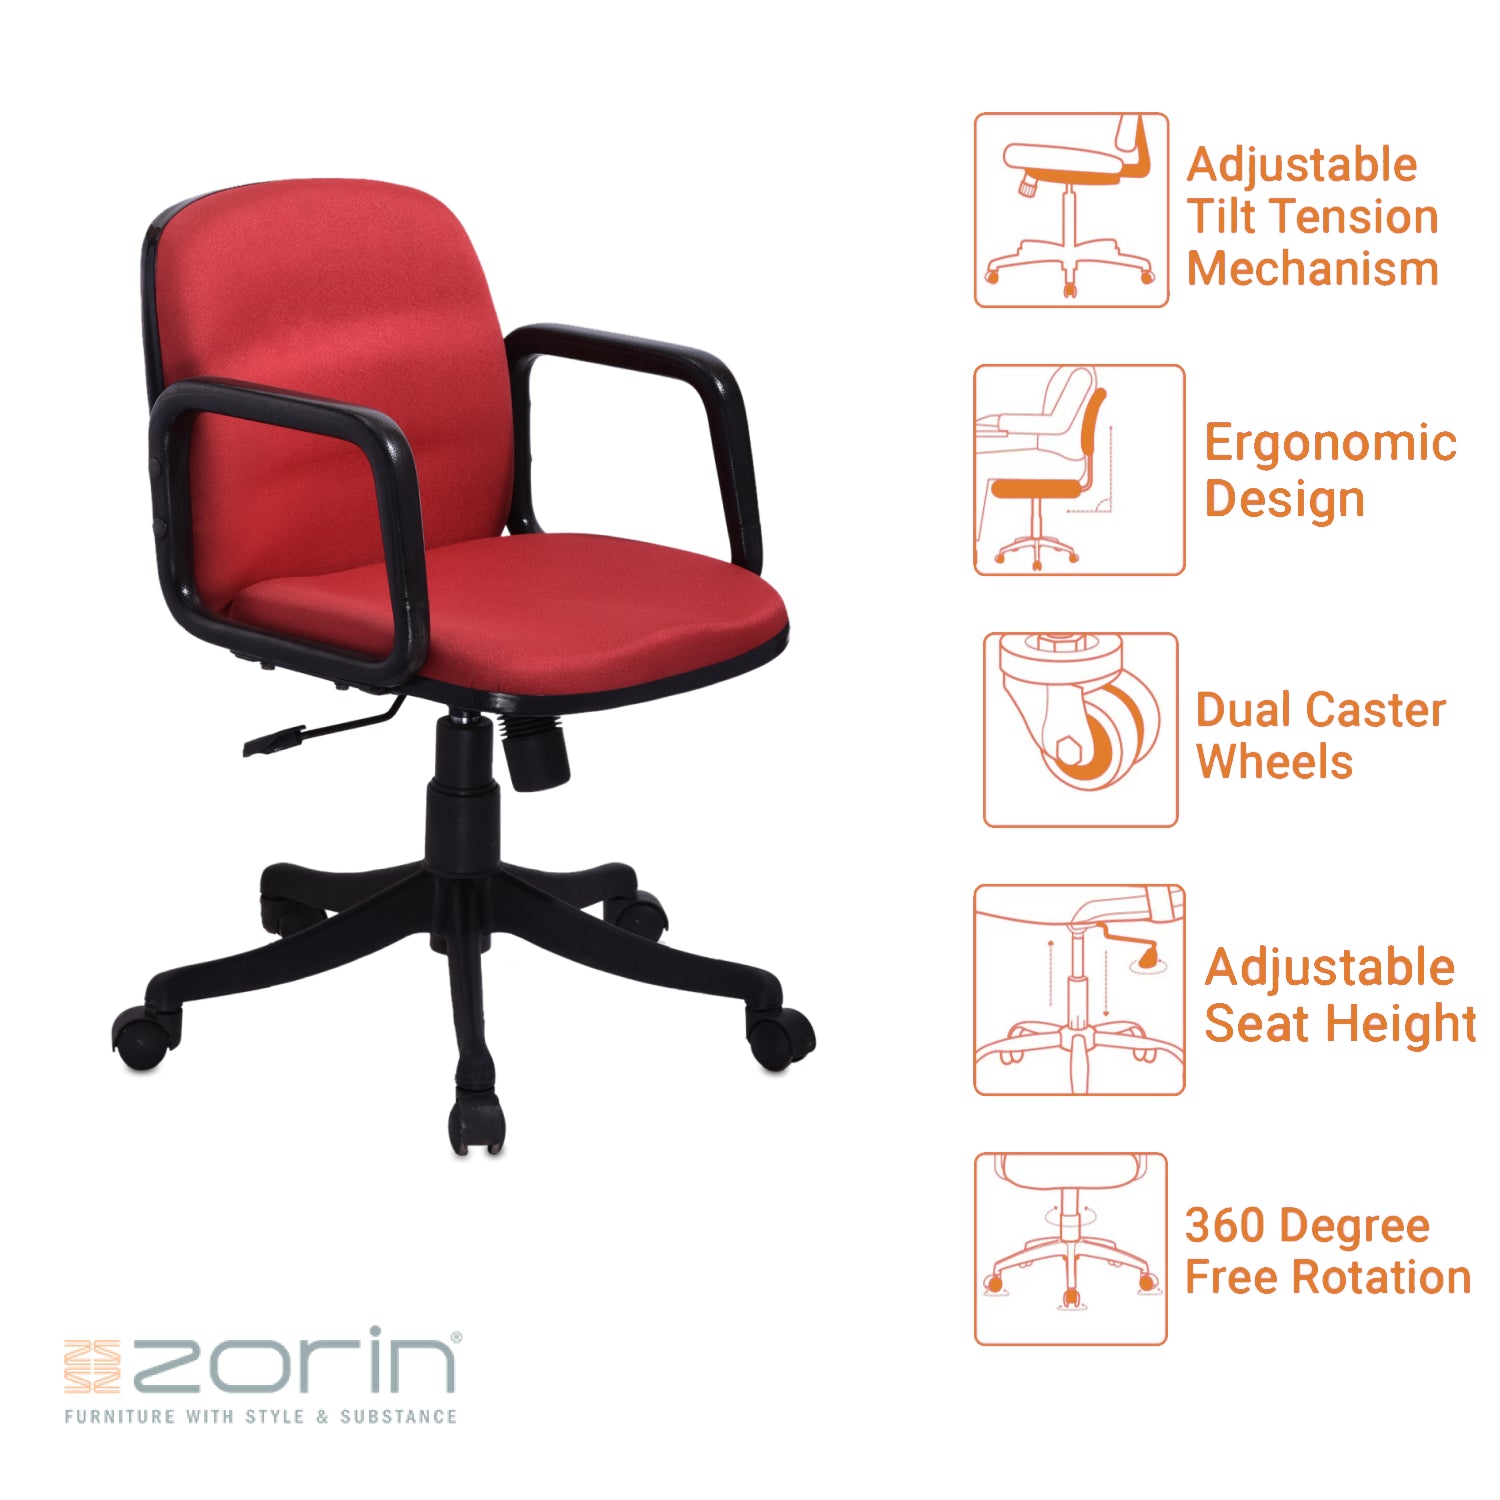 ZSE1024 Medium Back Chair by Zorin in Red Color Zorin